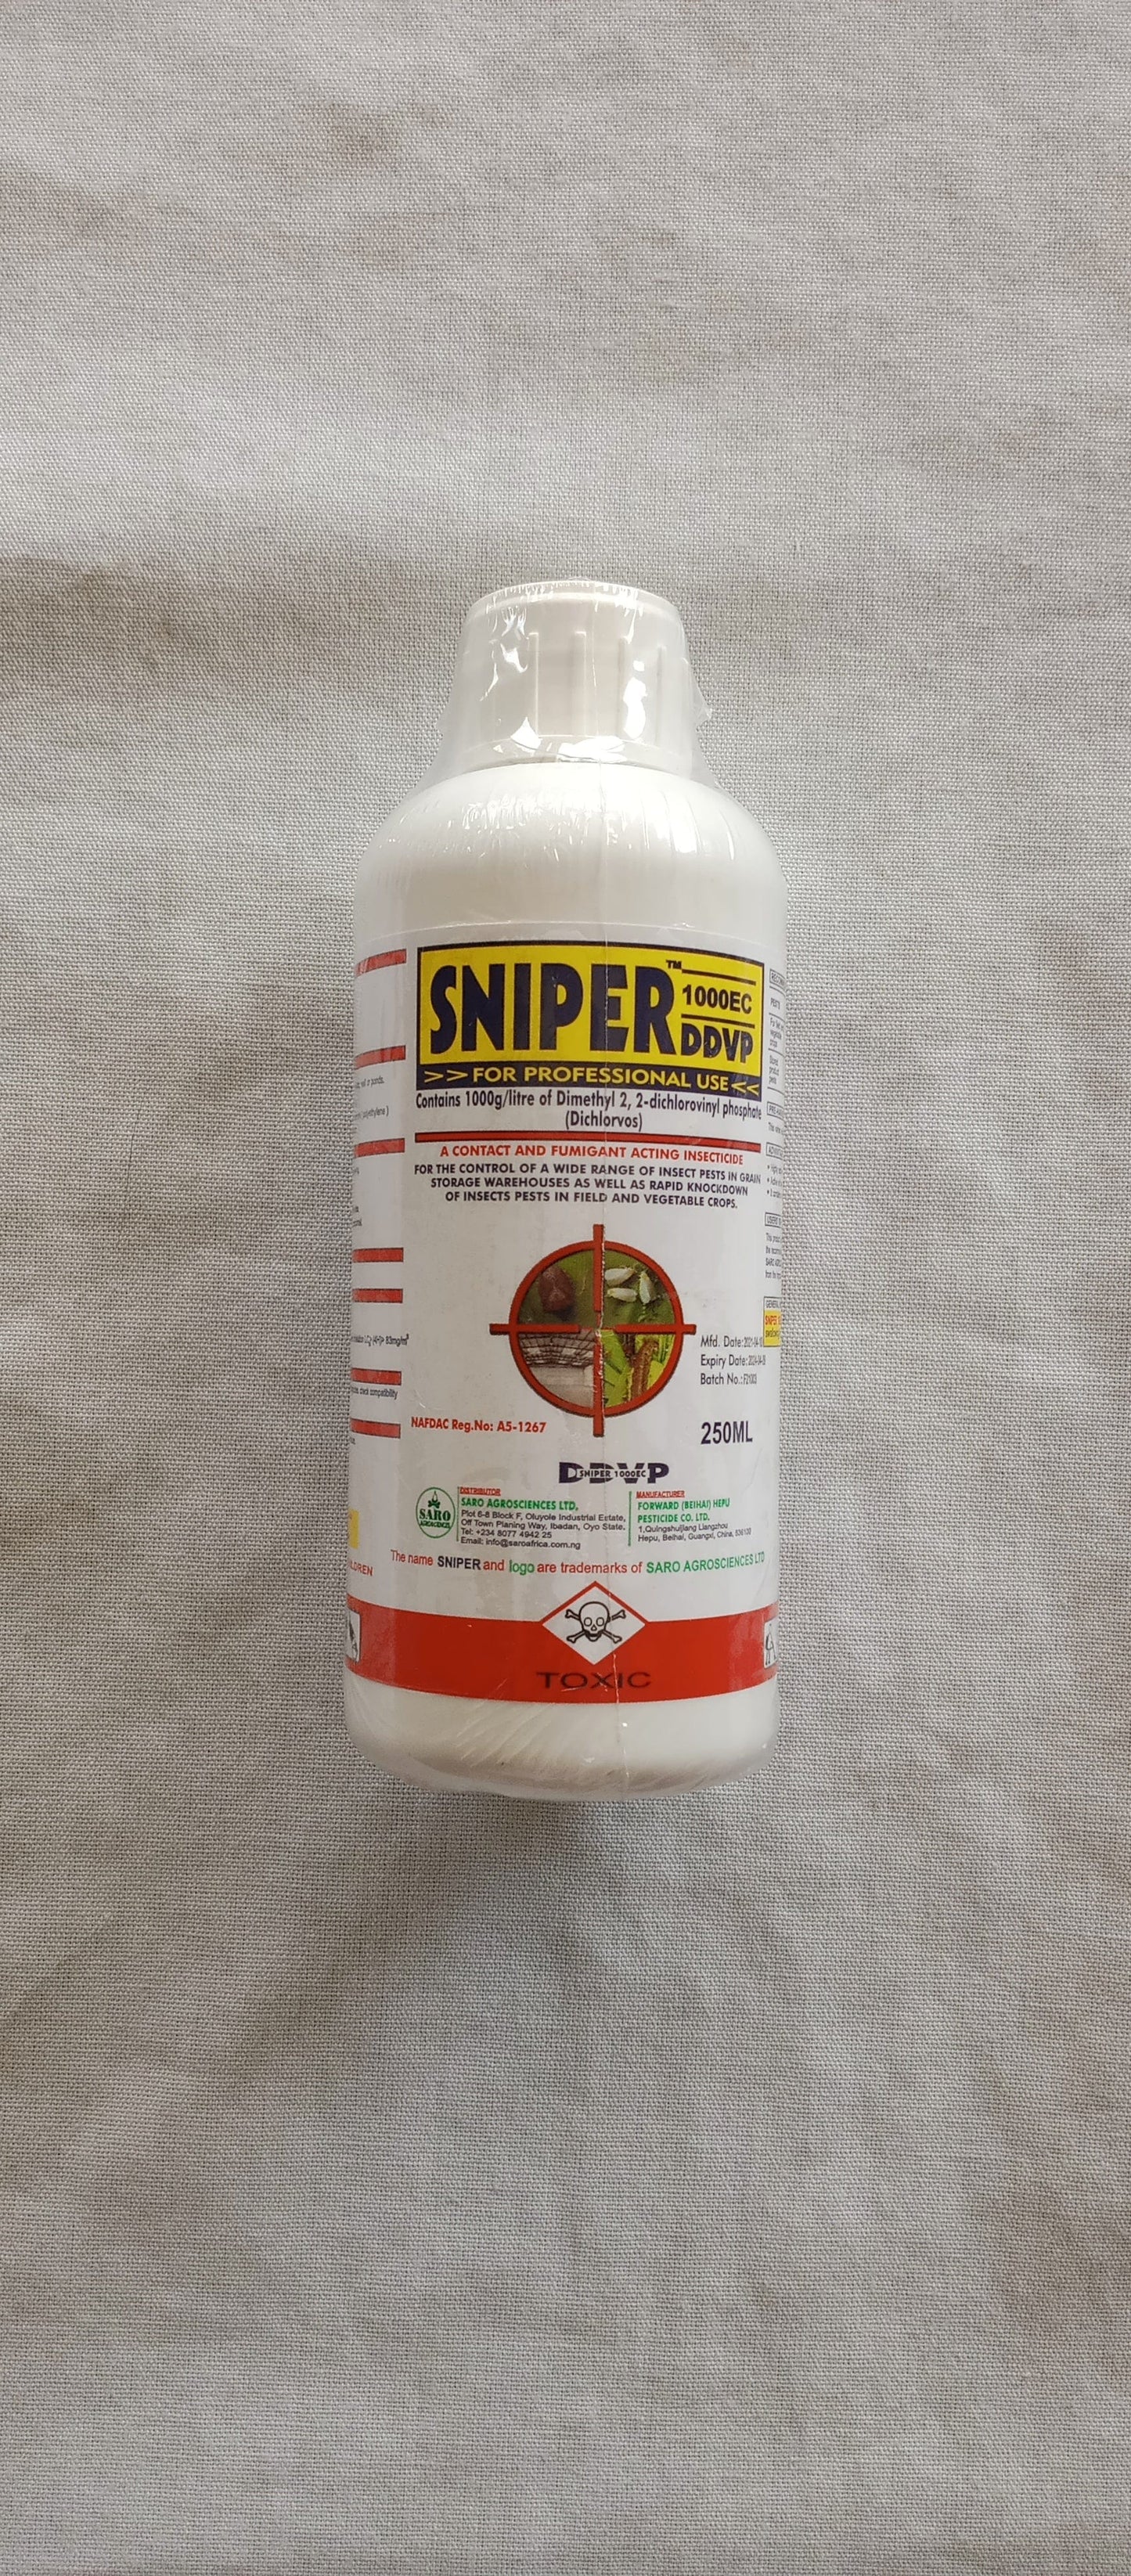 DDVP Insecticides Agro-toolz Sniper 250ml